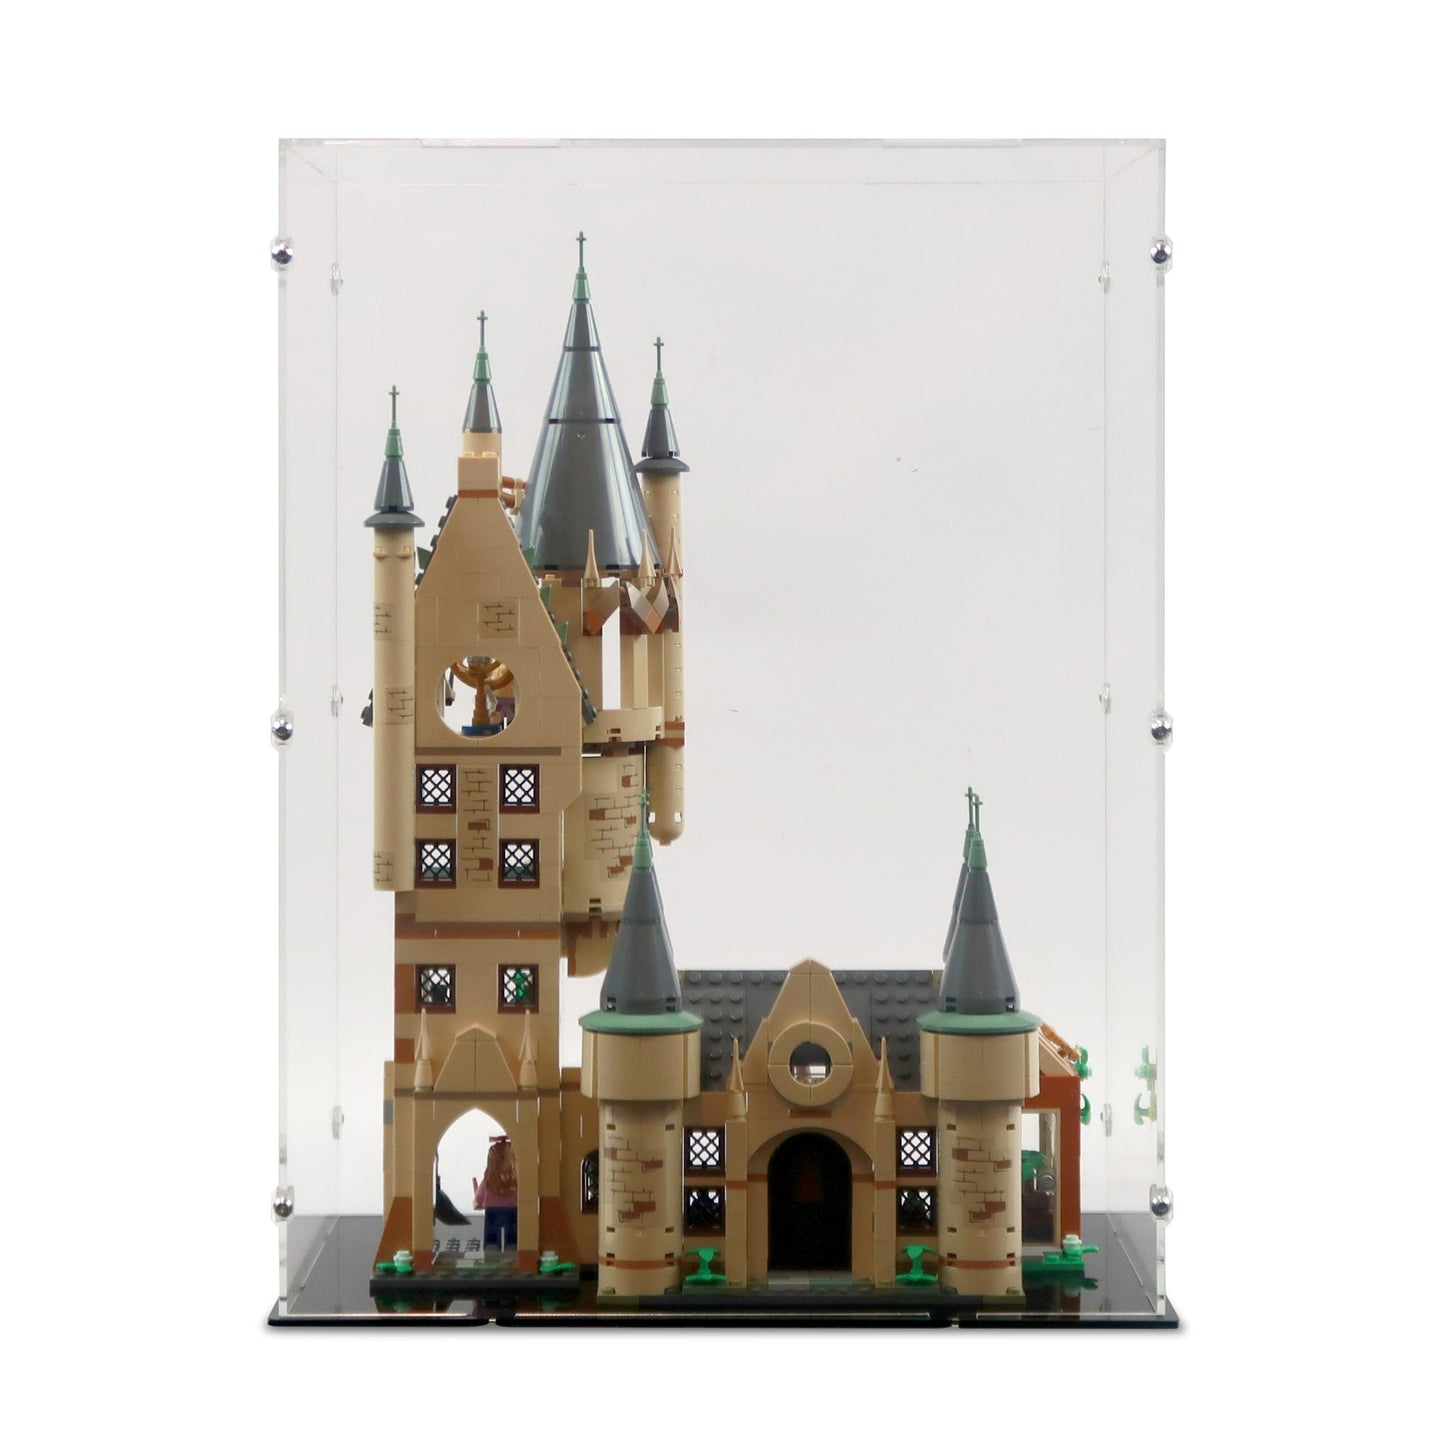 75969 Hogwarts Astronomy Tower Display Case